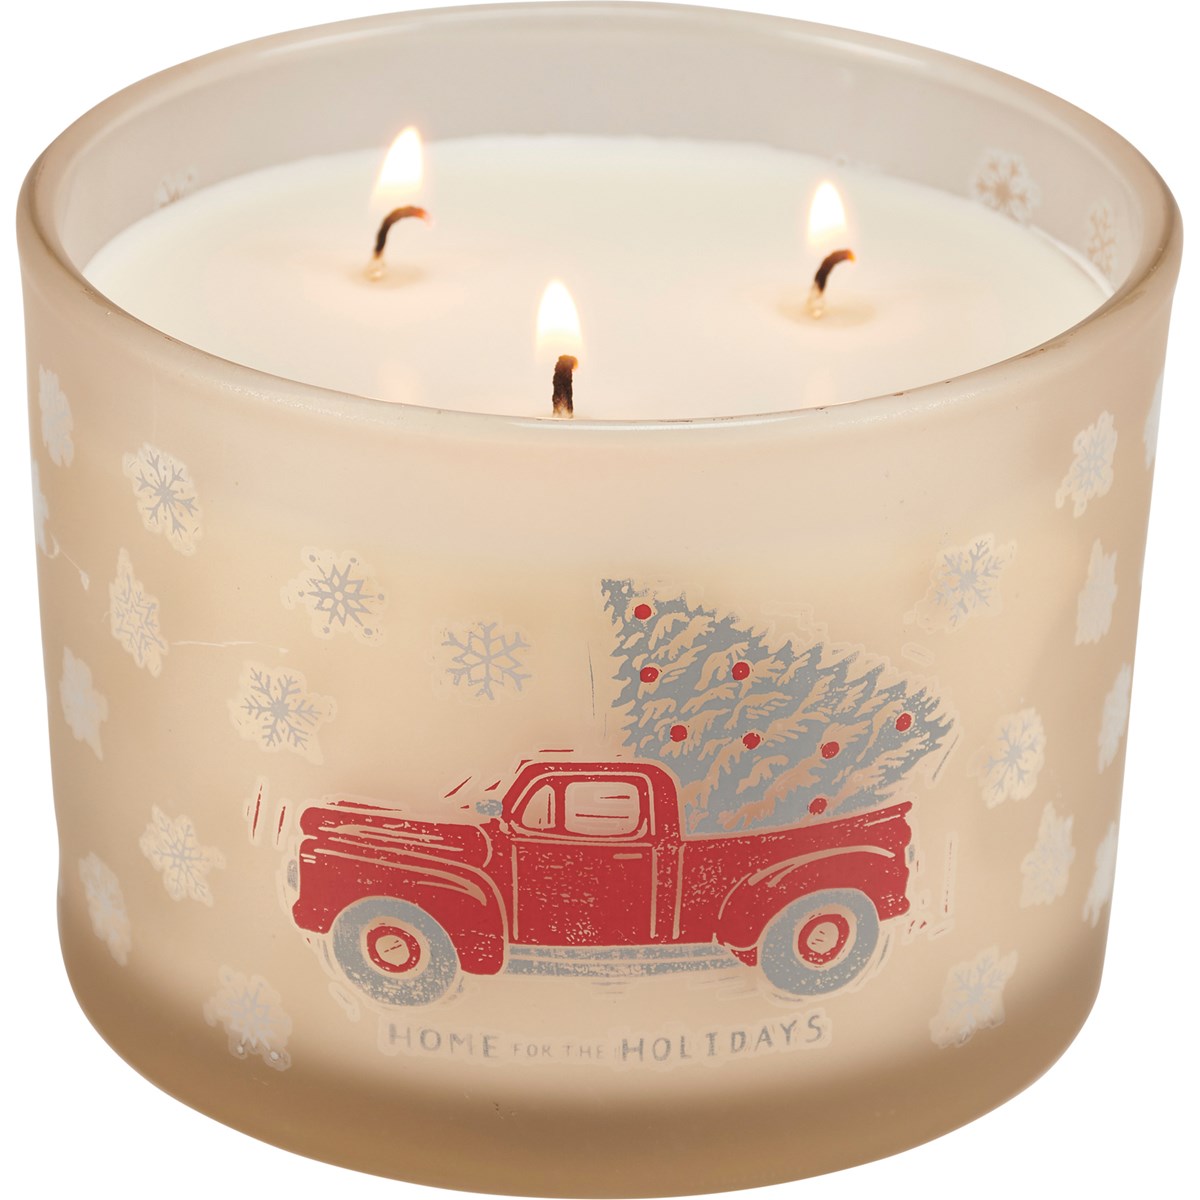 Home For The Holidays Jar Candle - Soy Wax, Glass, Cotton